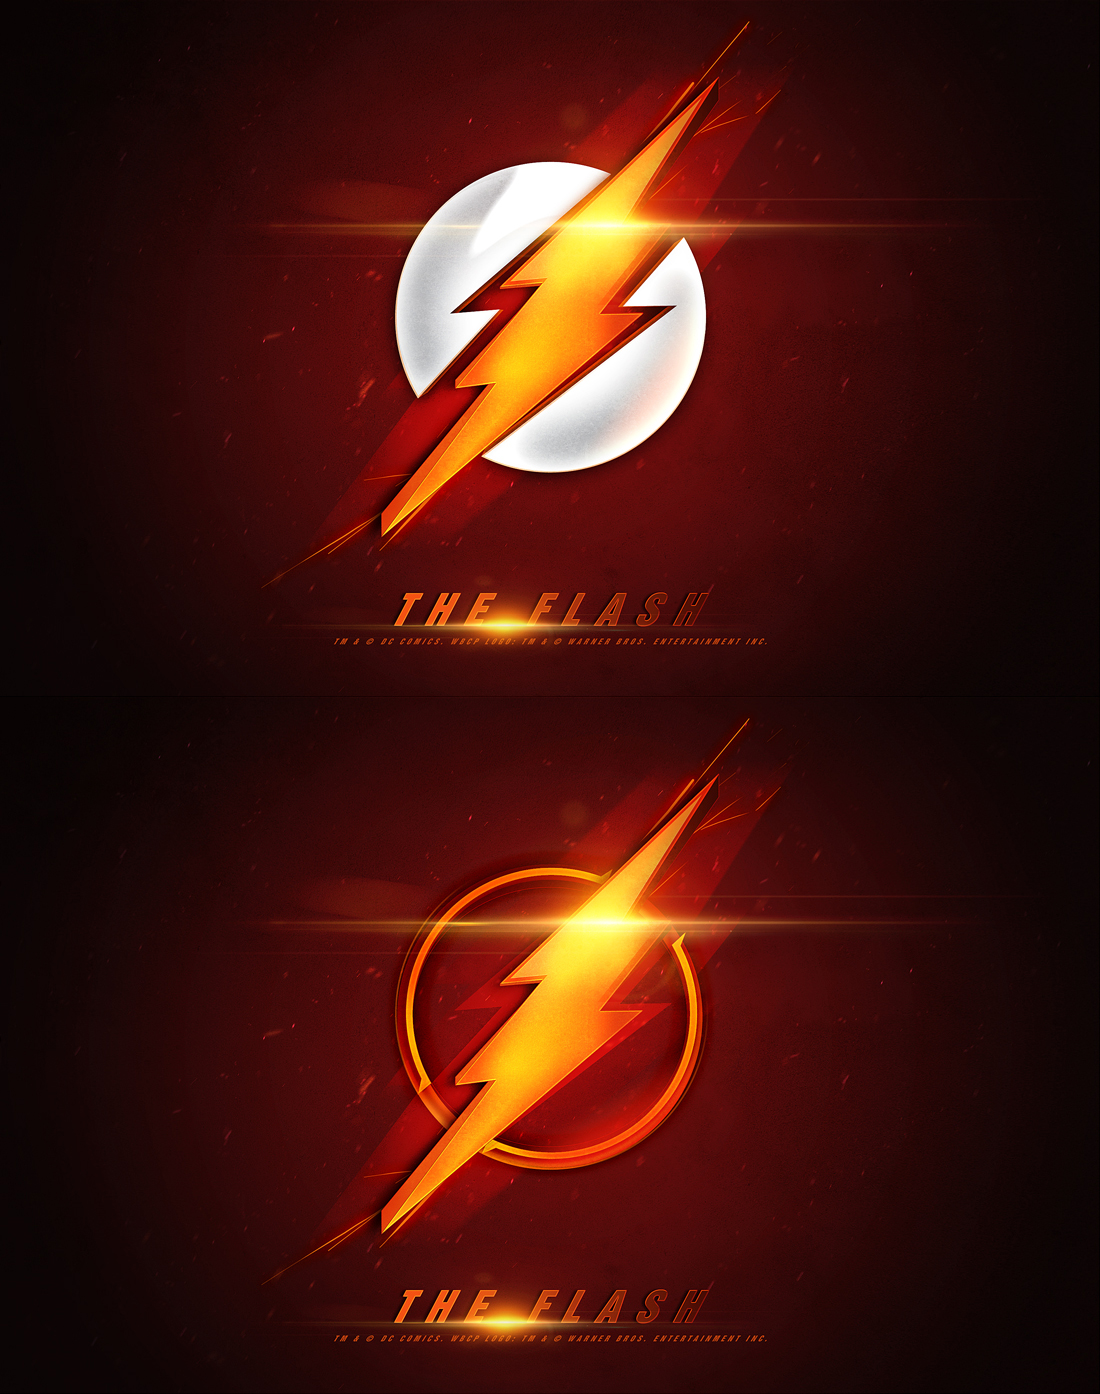 The Flash Logo Movie Poster By Oroster